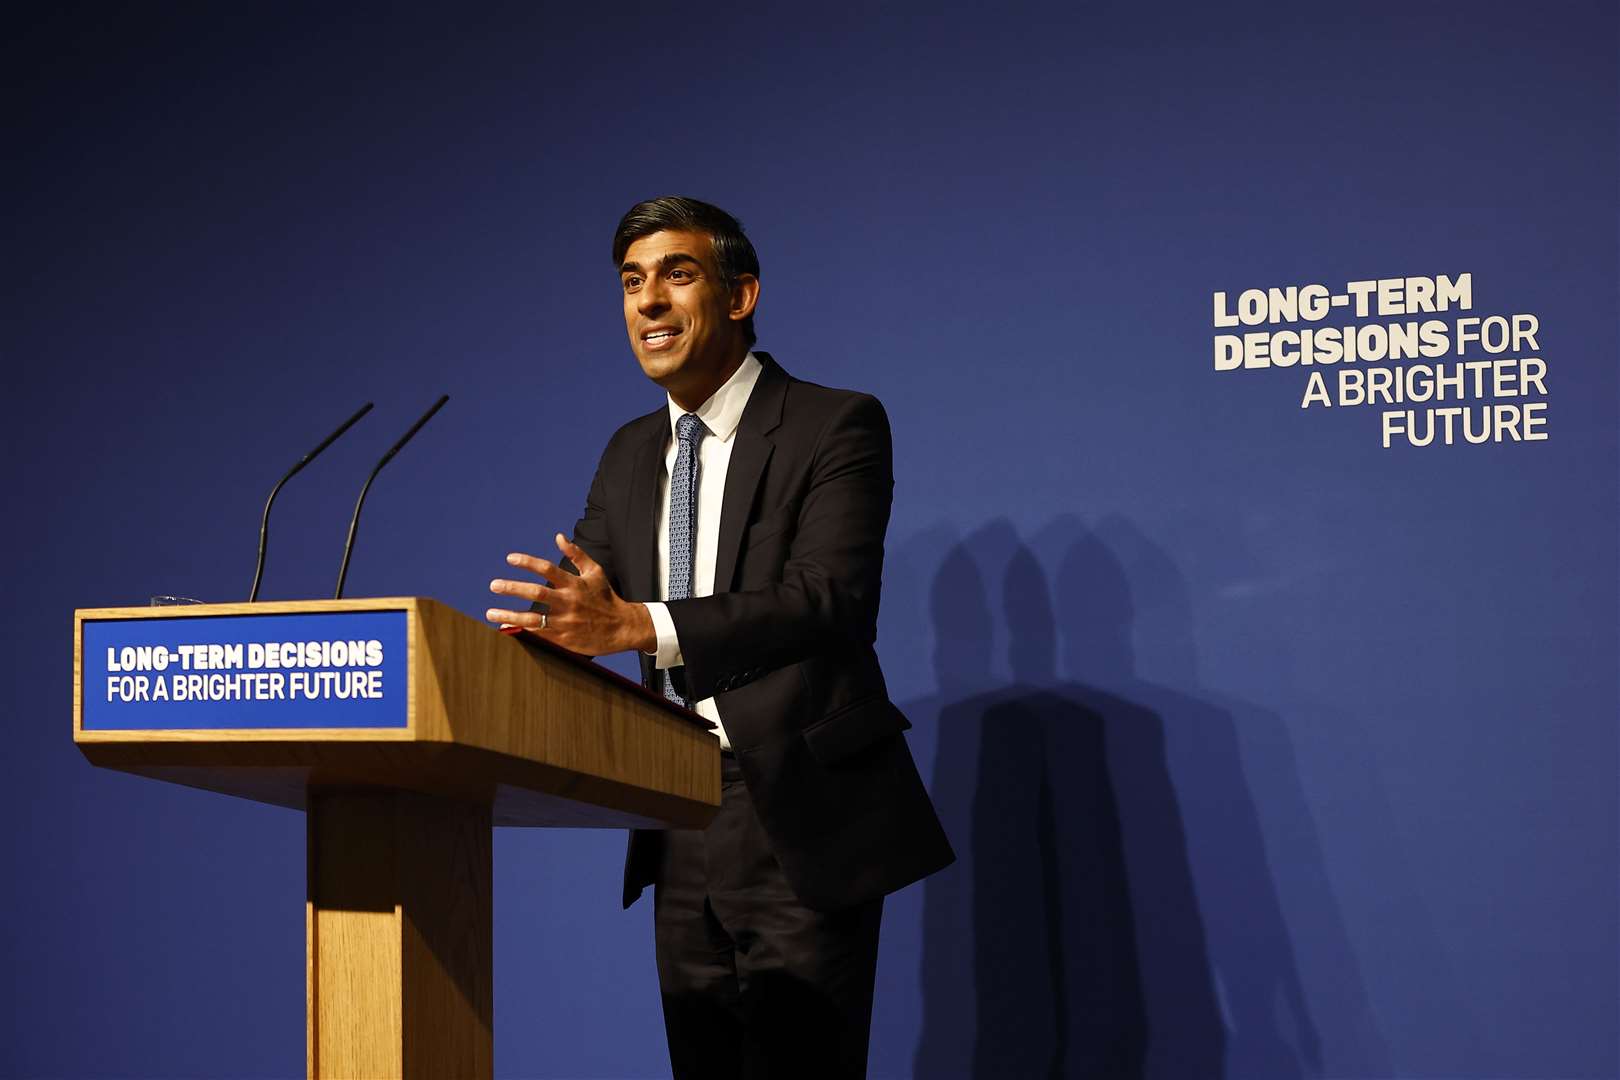 Rishi Sunak delivering a speech setting out how he will address the dangers presented by artificial intelligence while harnessing its benefits (Peter Nicholls/PA)